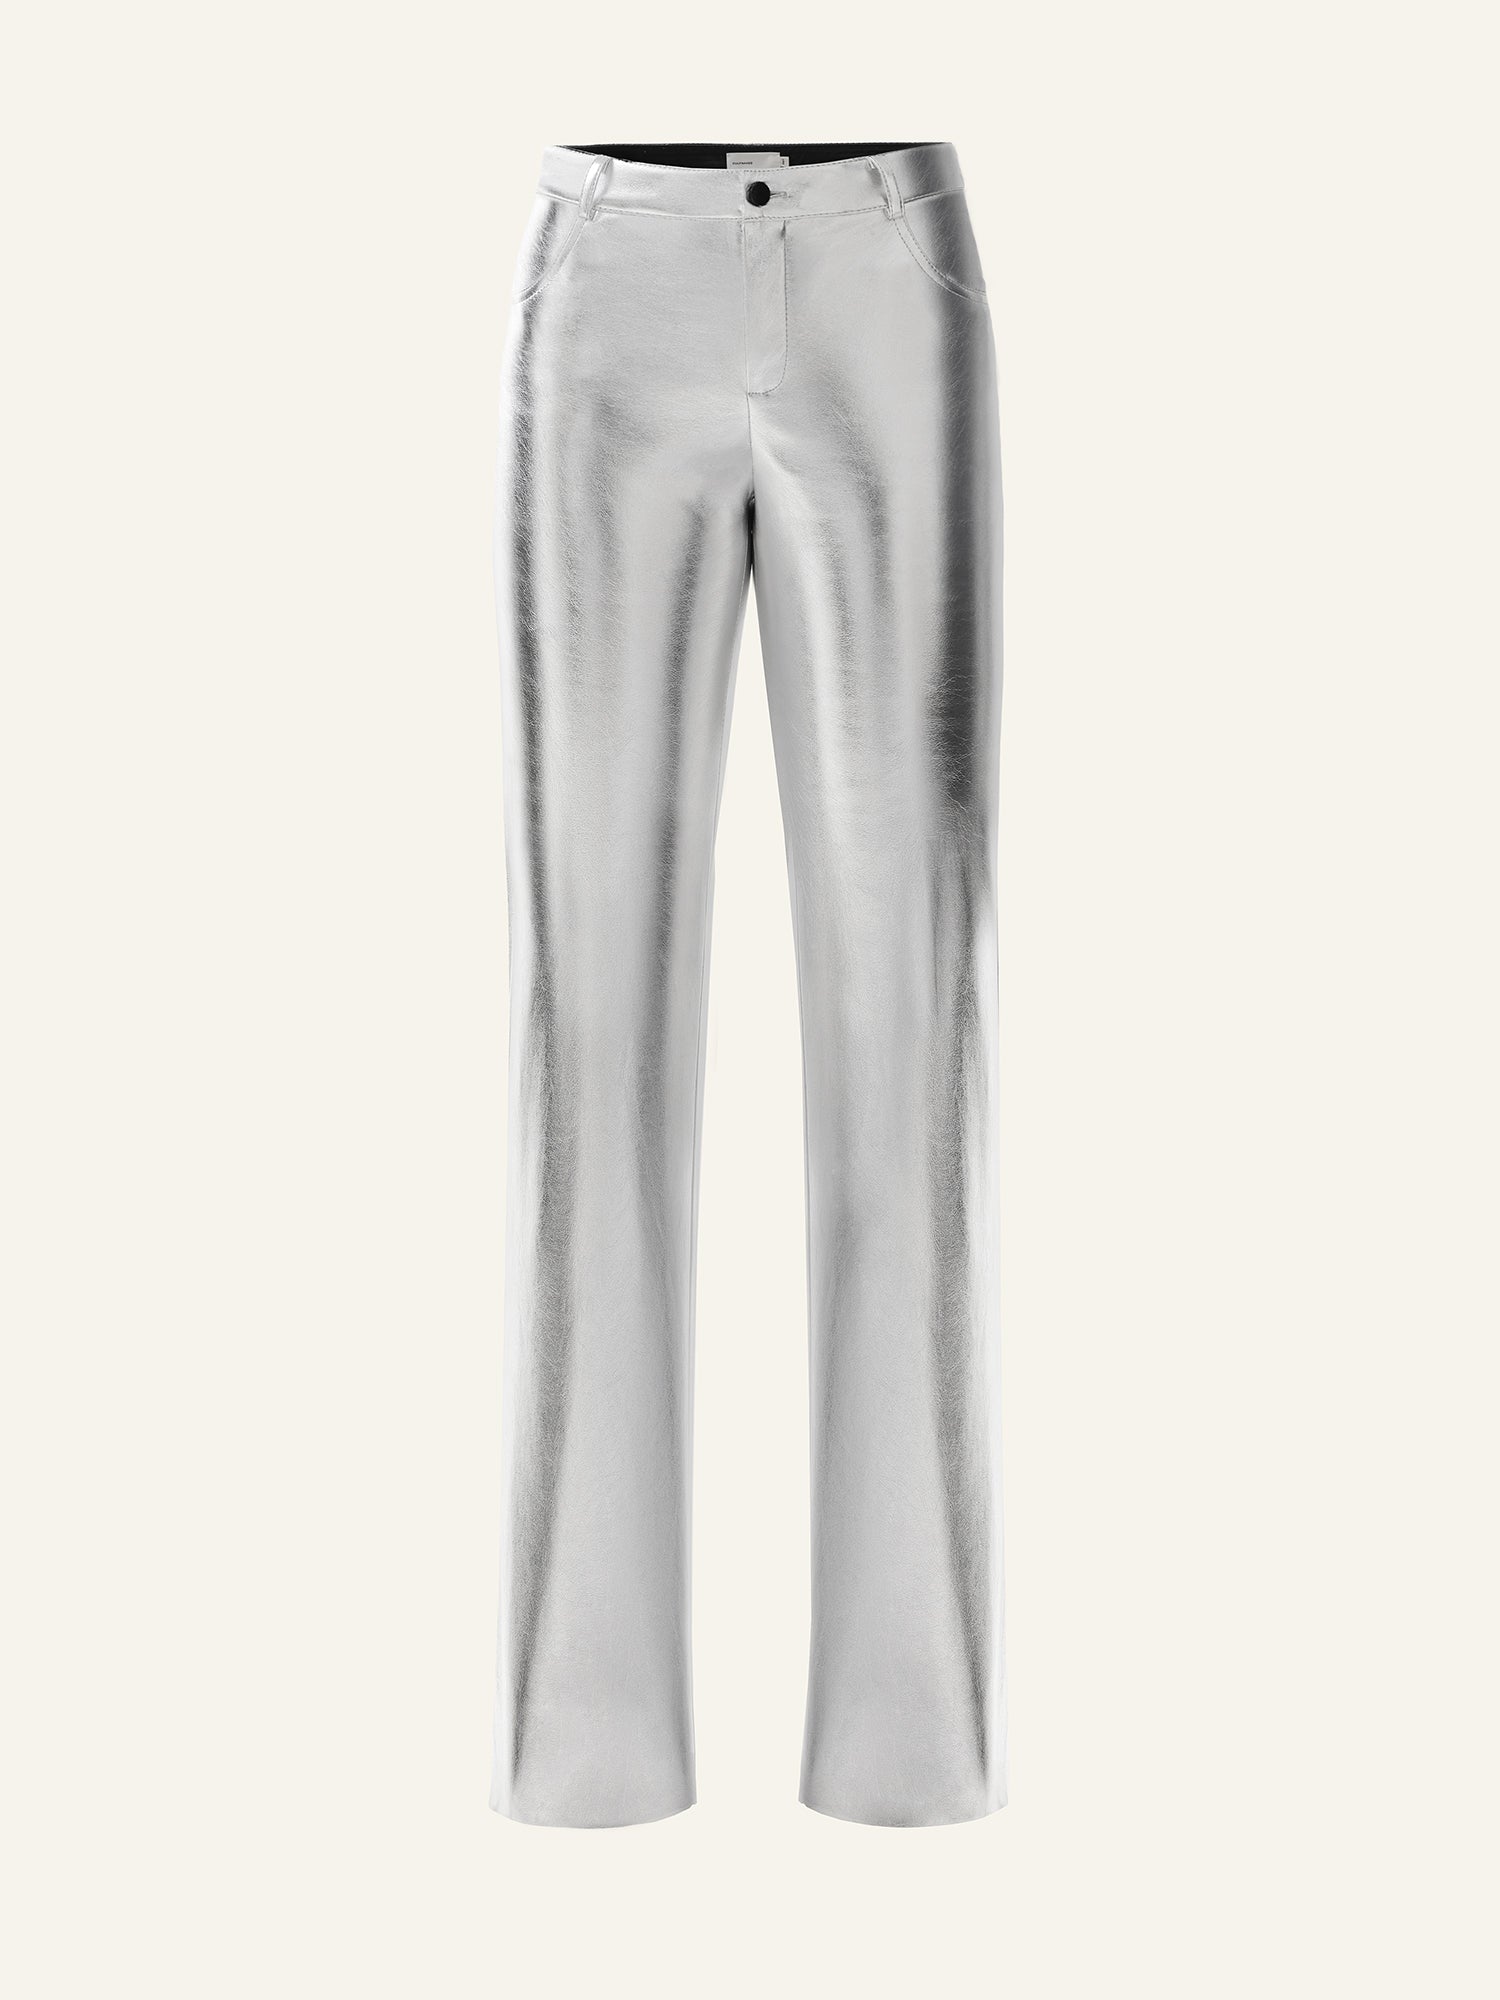 Silver color trousers